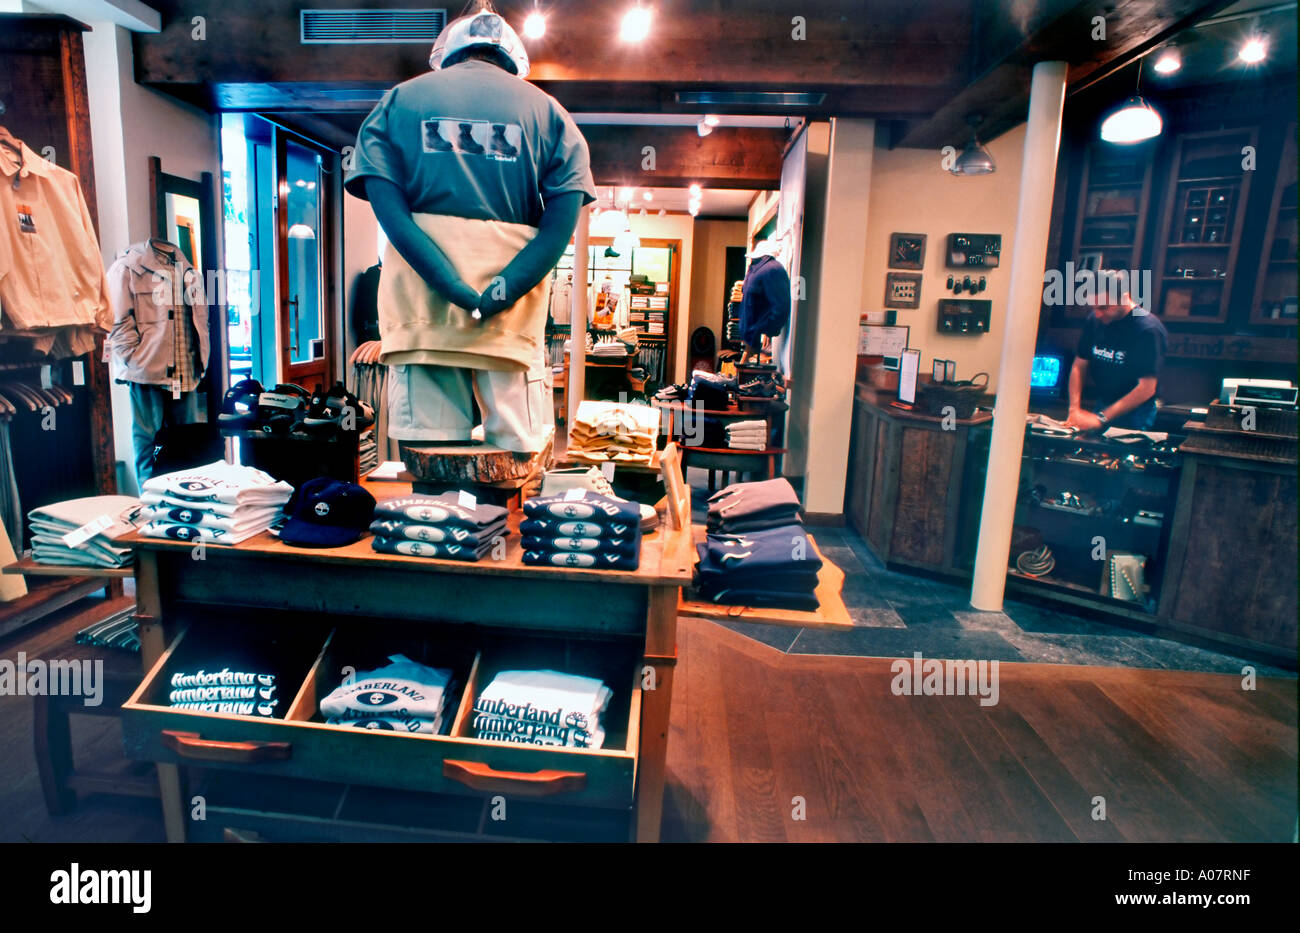 Paris France Shopping Interior Sports Store Timberland inside "Clothing  Store" Textiles Display, Sporting goods, contemporary retail interior  design Stock Photo - Alamy